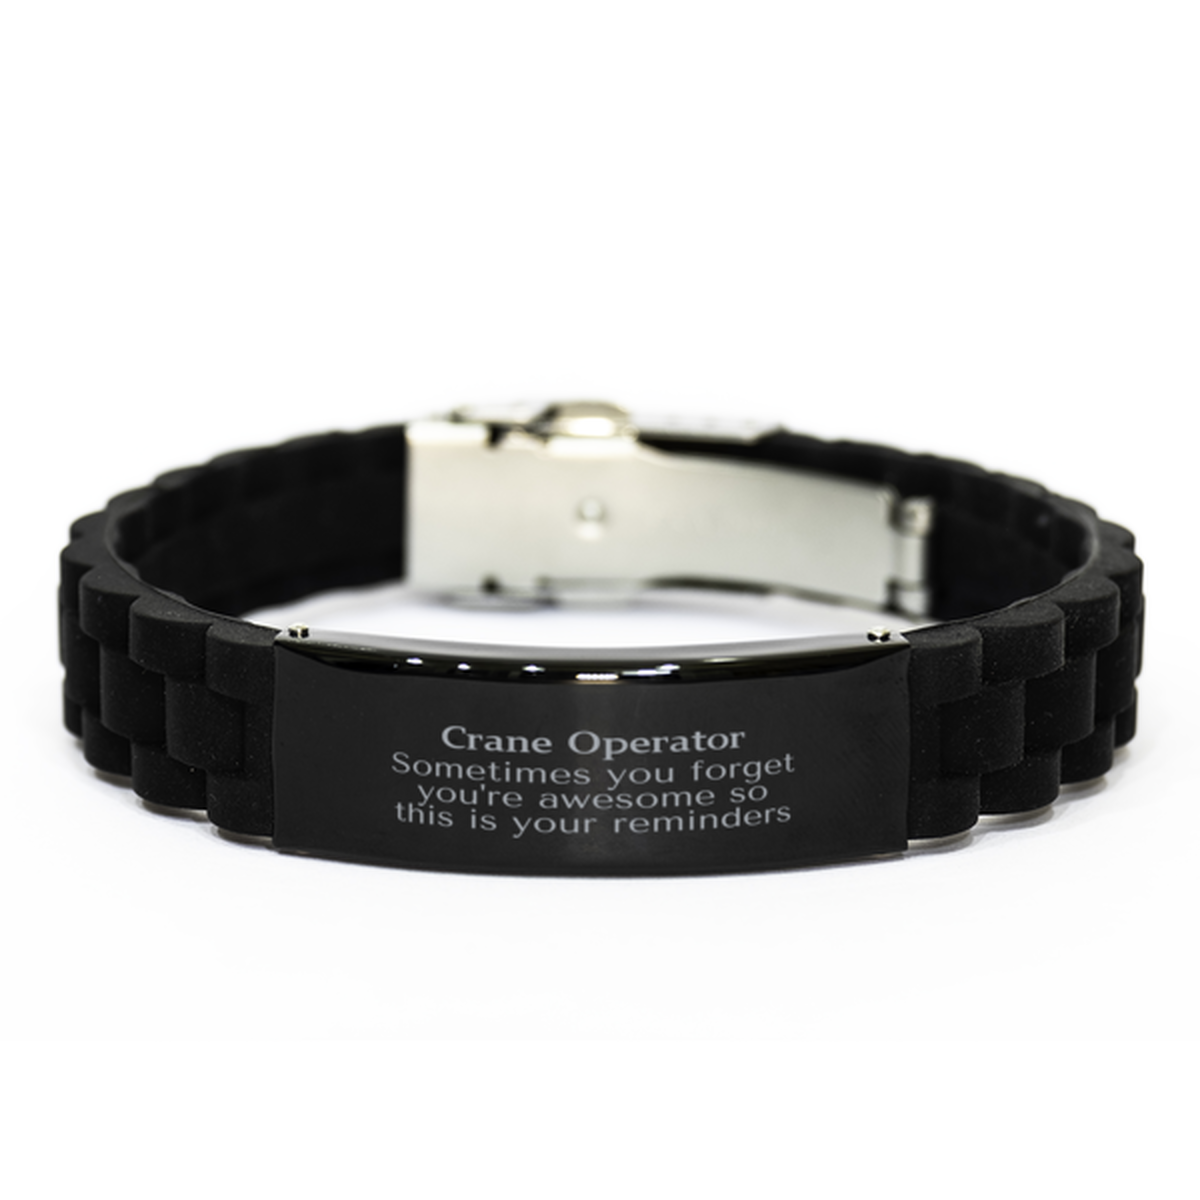 Sentimental Crane Operator Black Glidelock Clasp Bracelet, Crane Operator Sometimes you forget you're awesome so this is your reminders, Graduation Christmas Birthday Gifts for Crane Operator, Men, Women, Coworkers